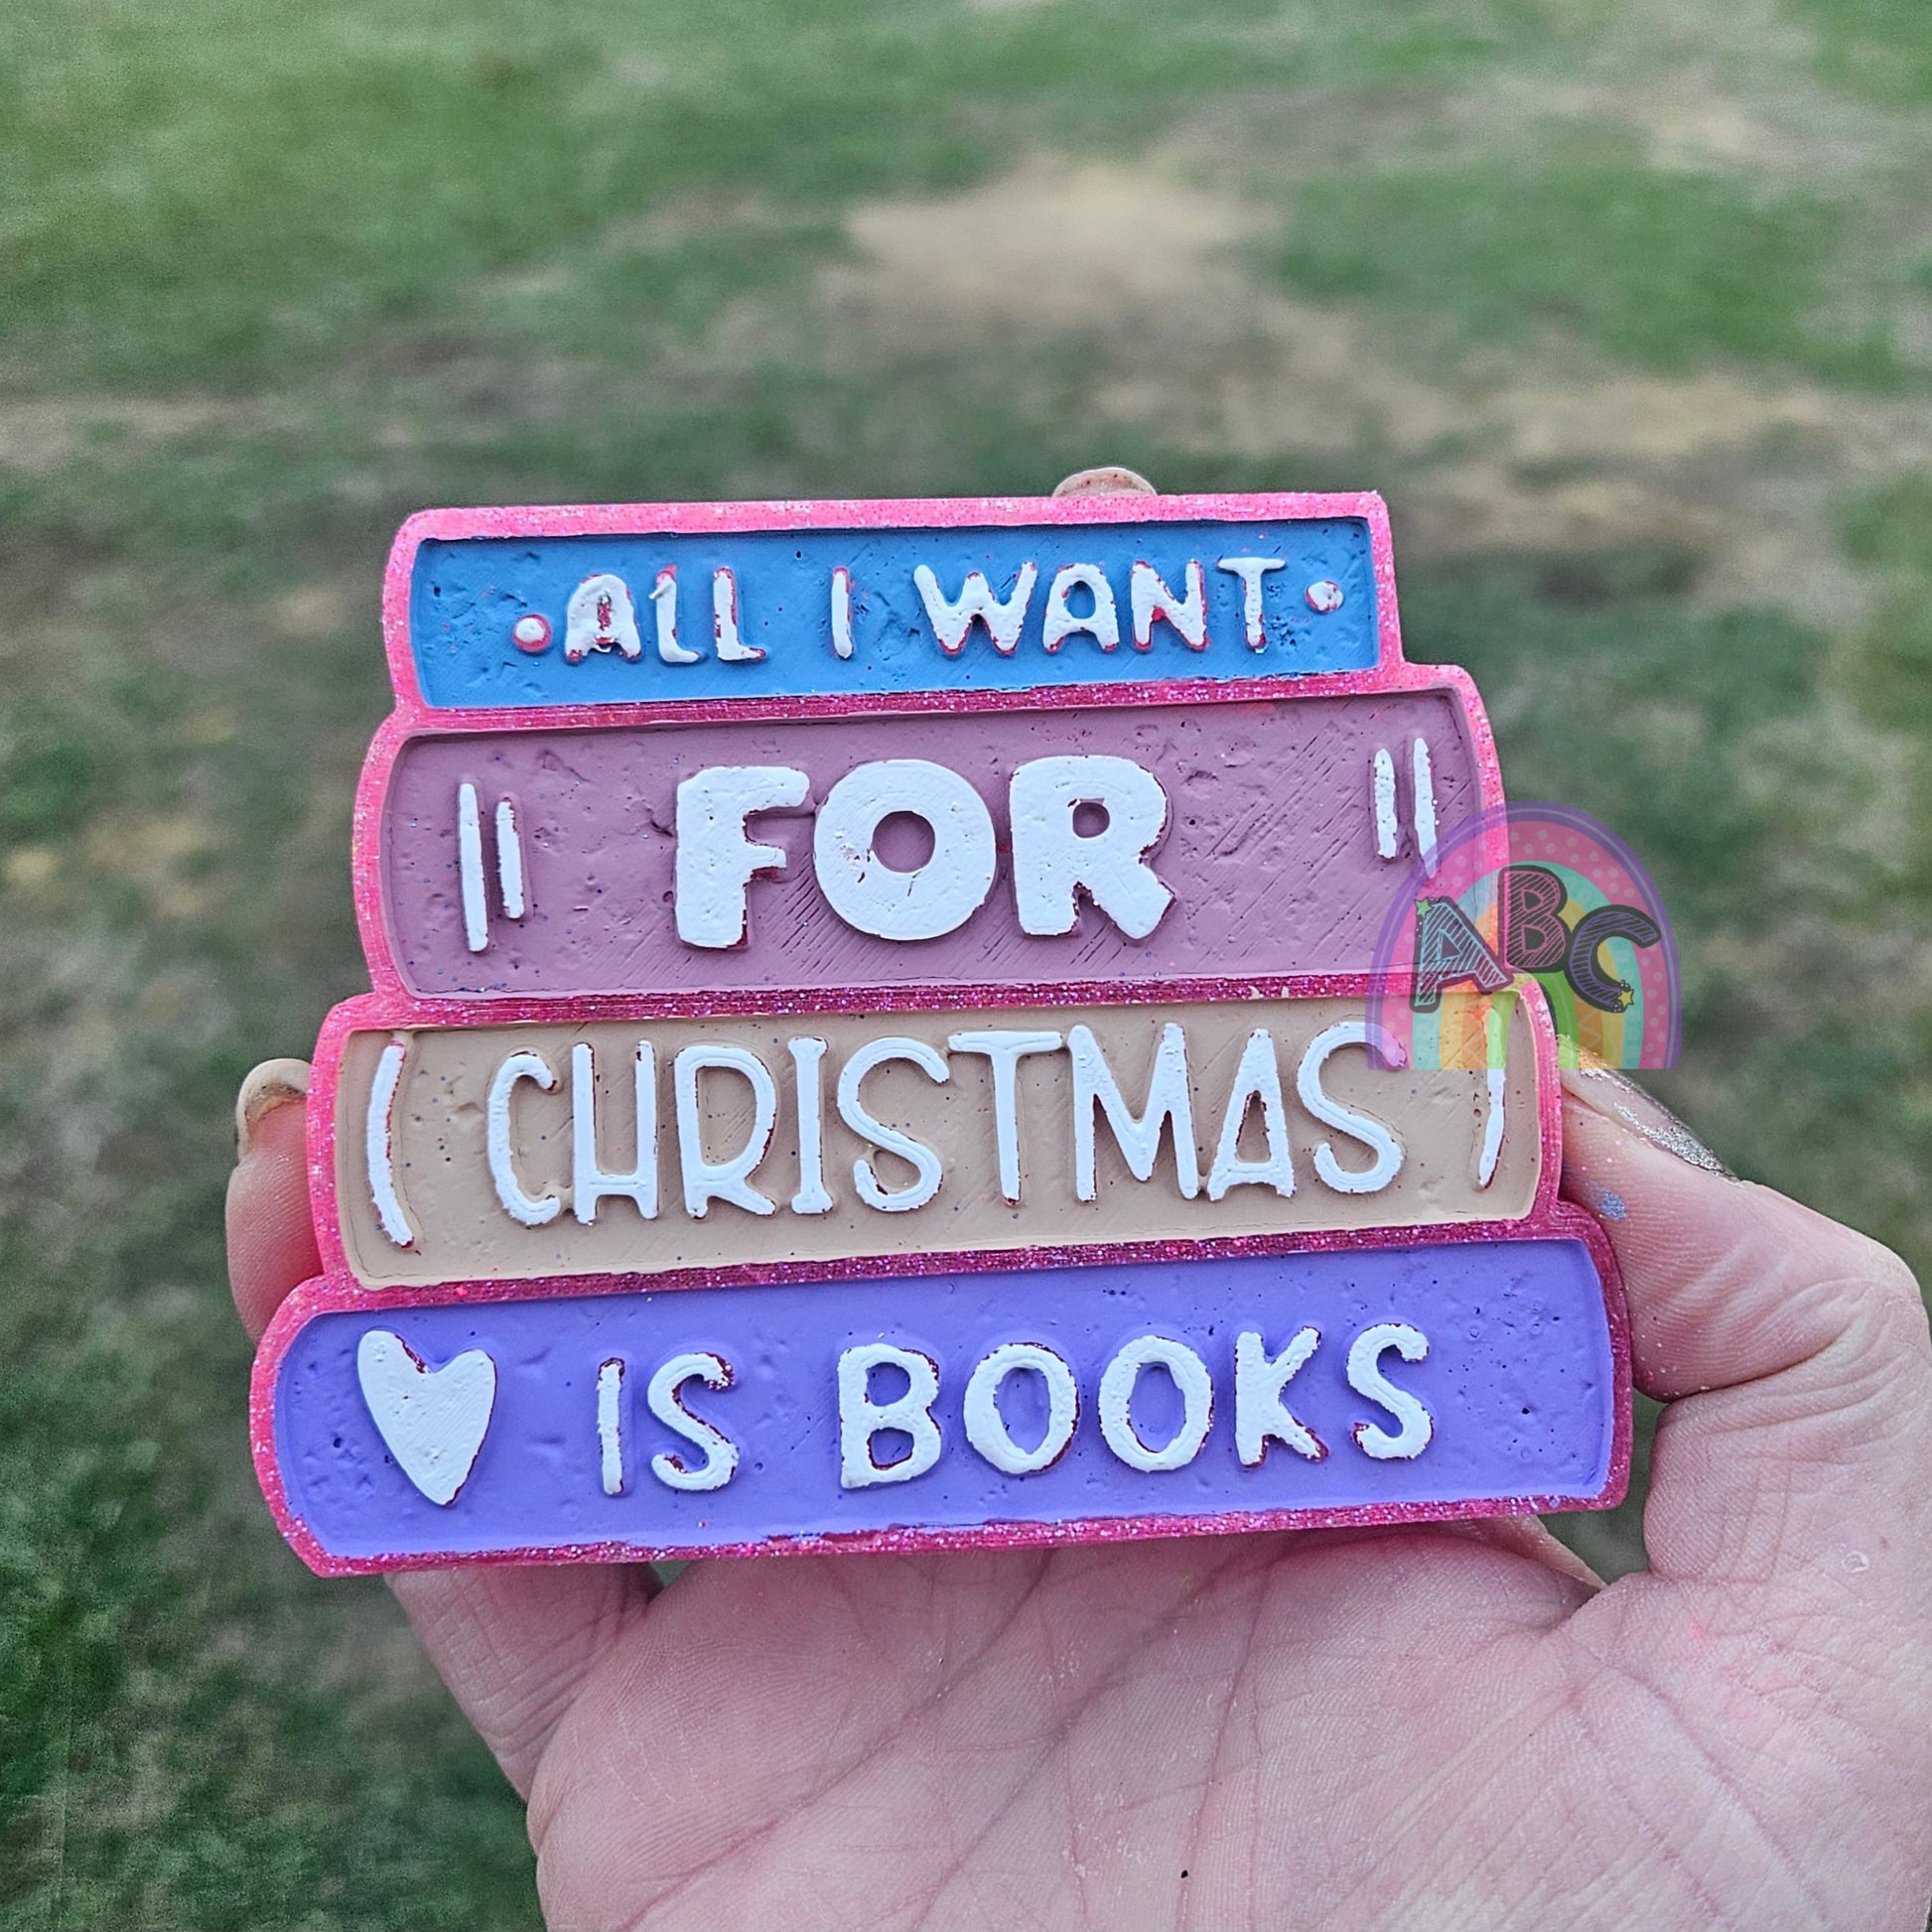 All I Want For Christmas is Books